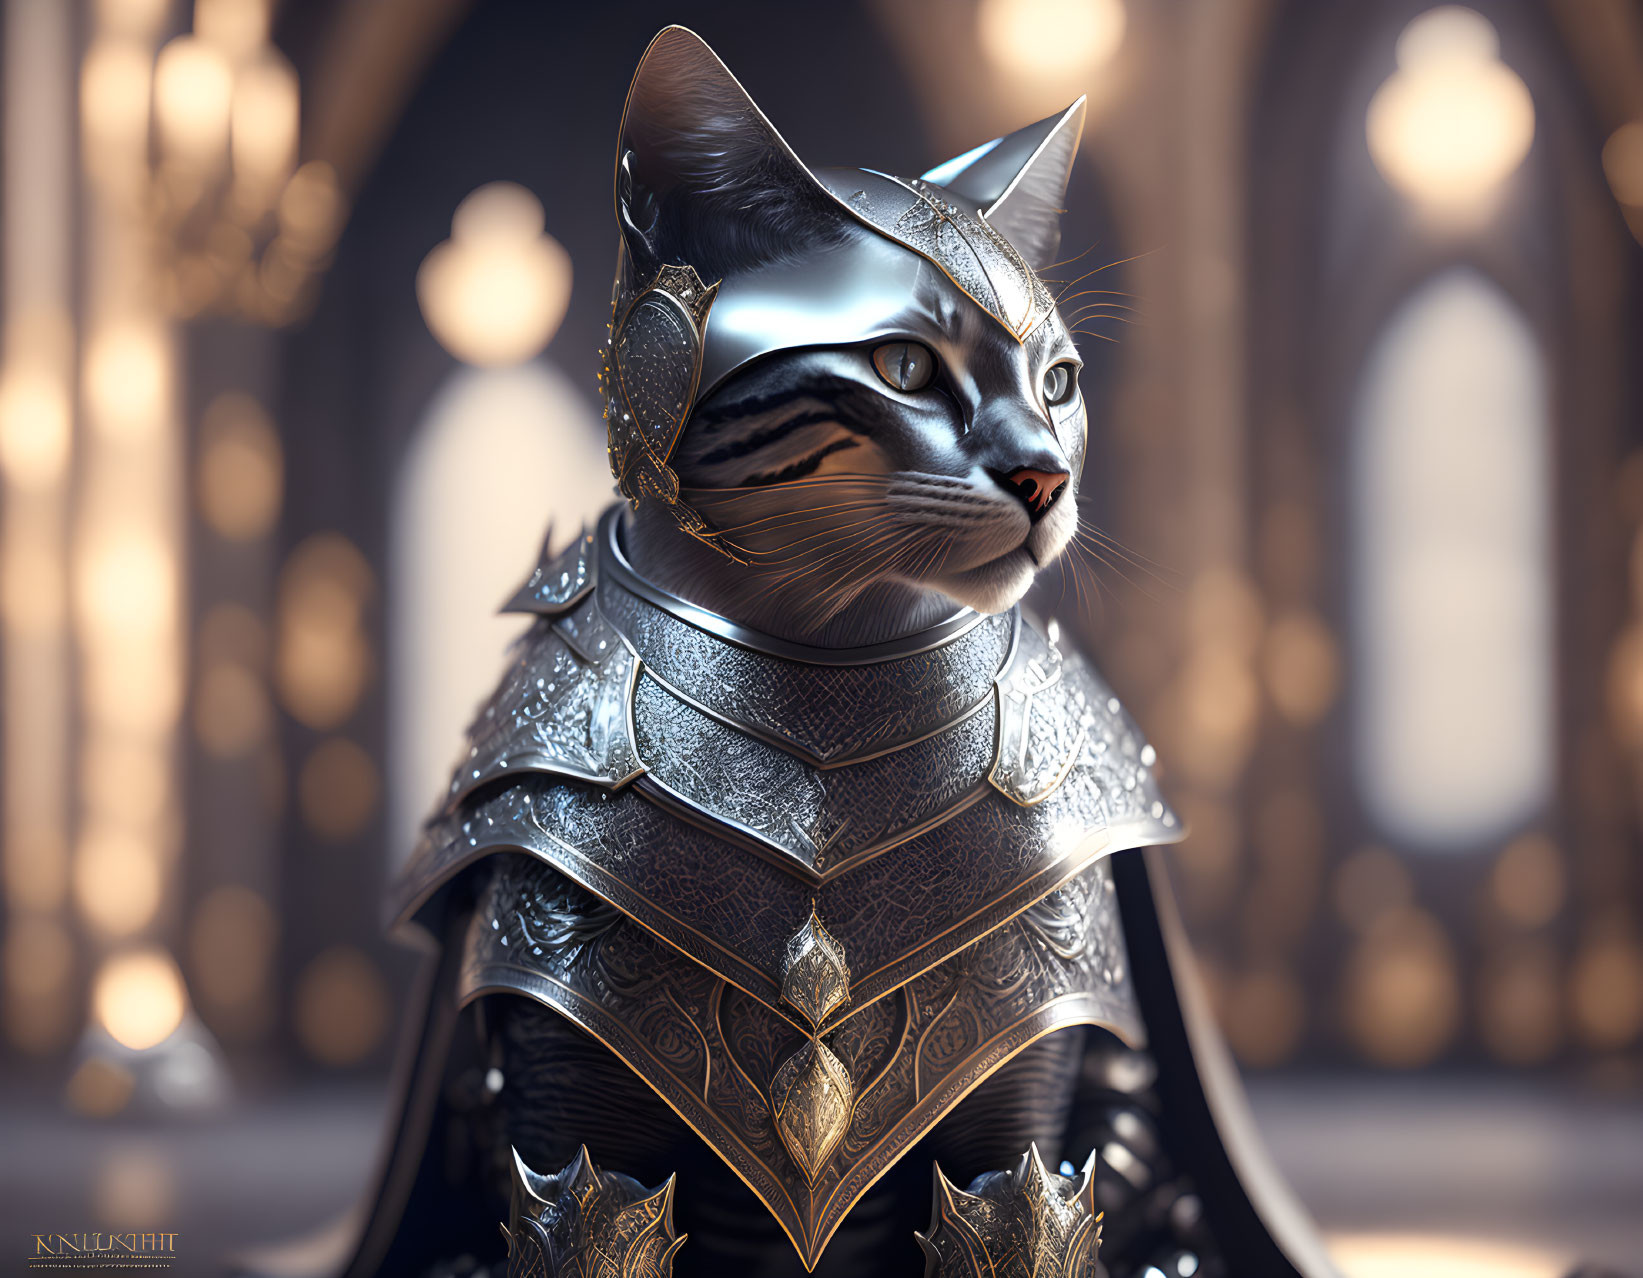 Cat in medieval armor against grand hall backdrop